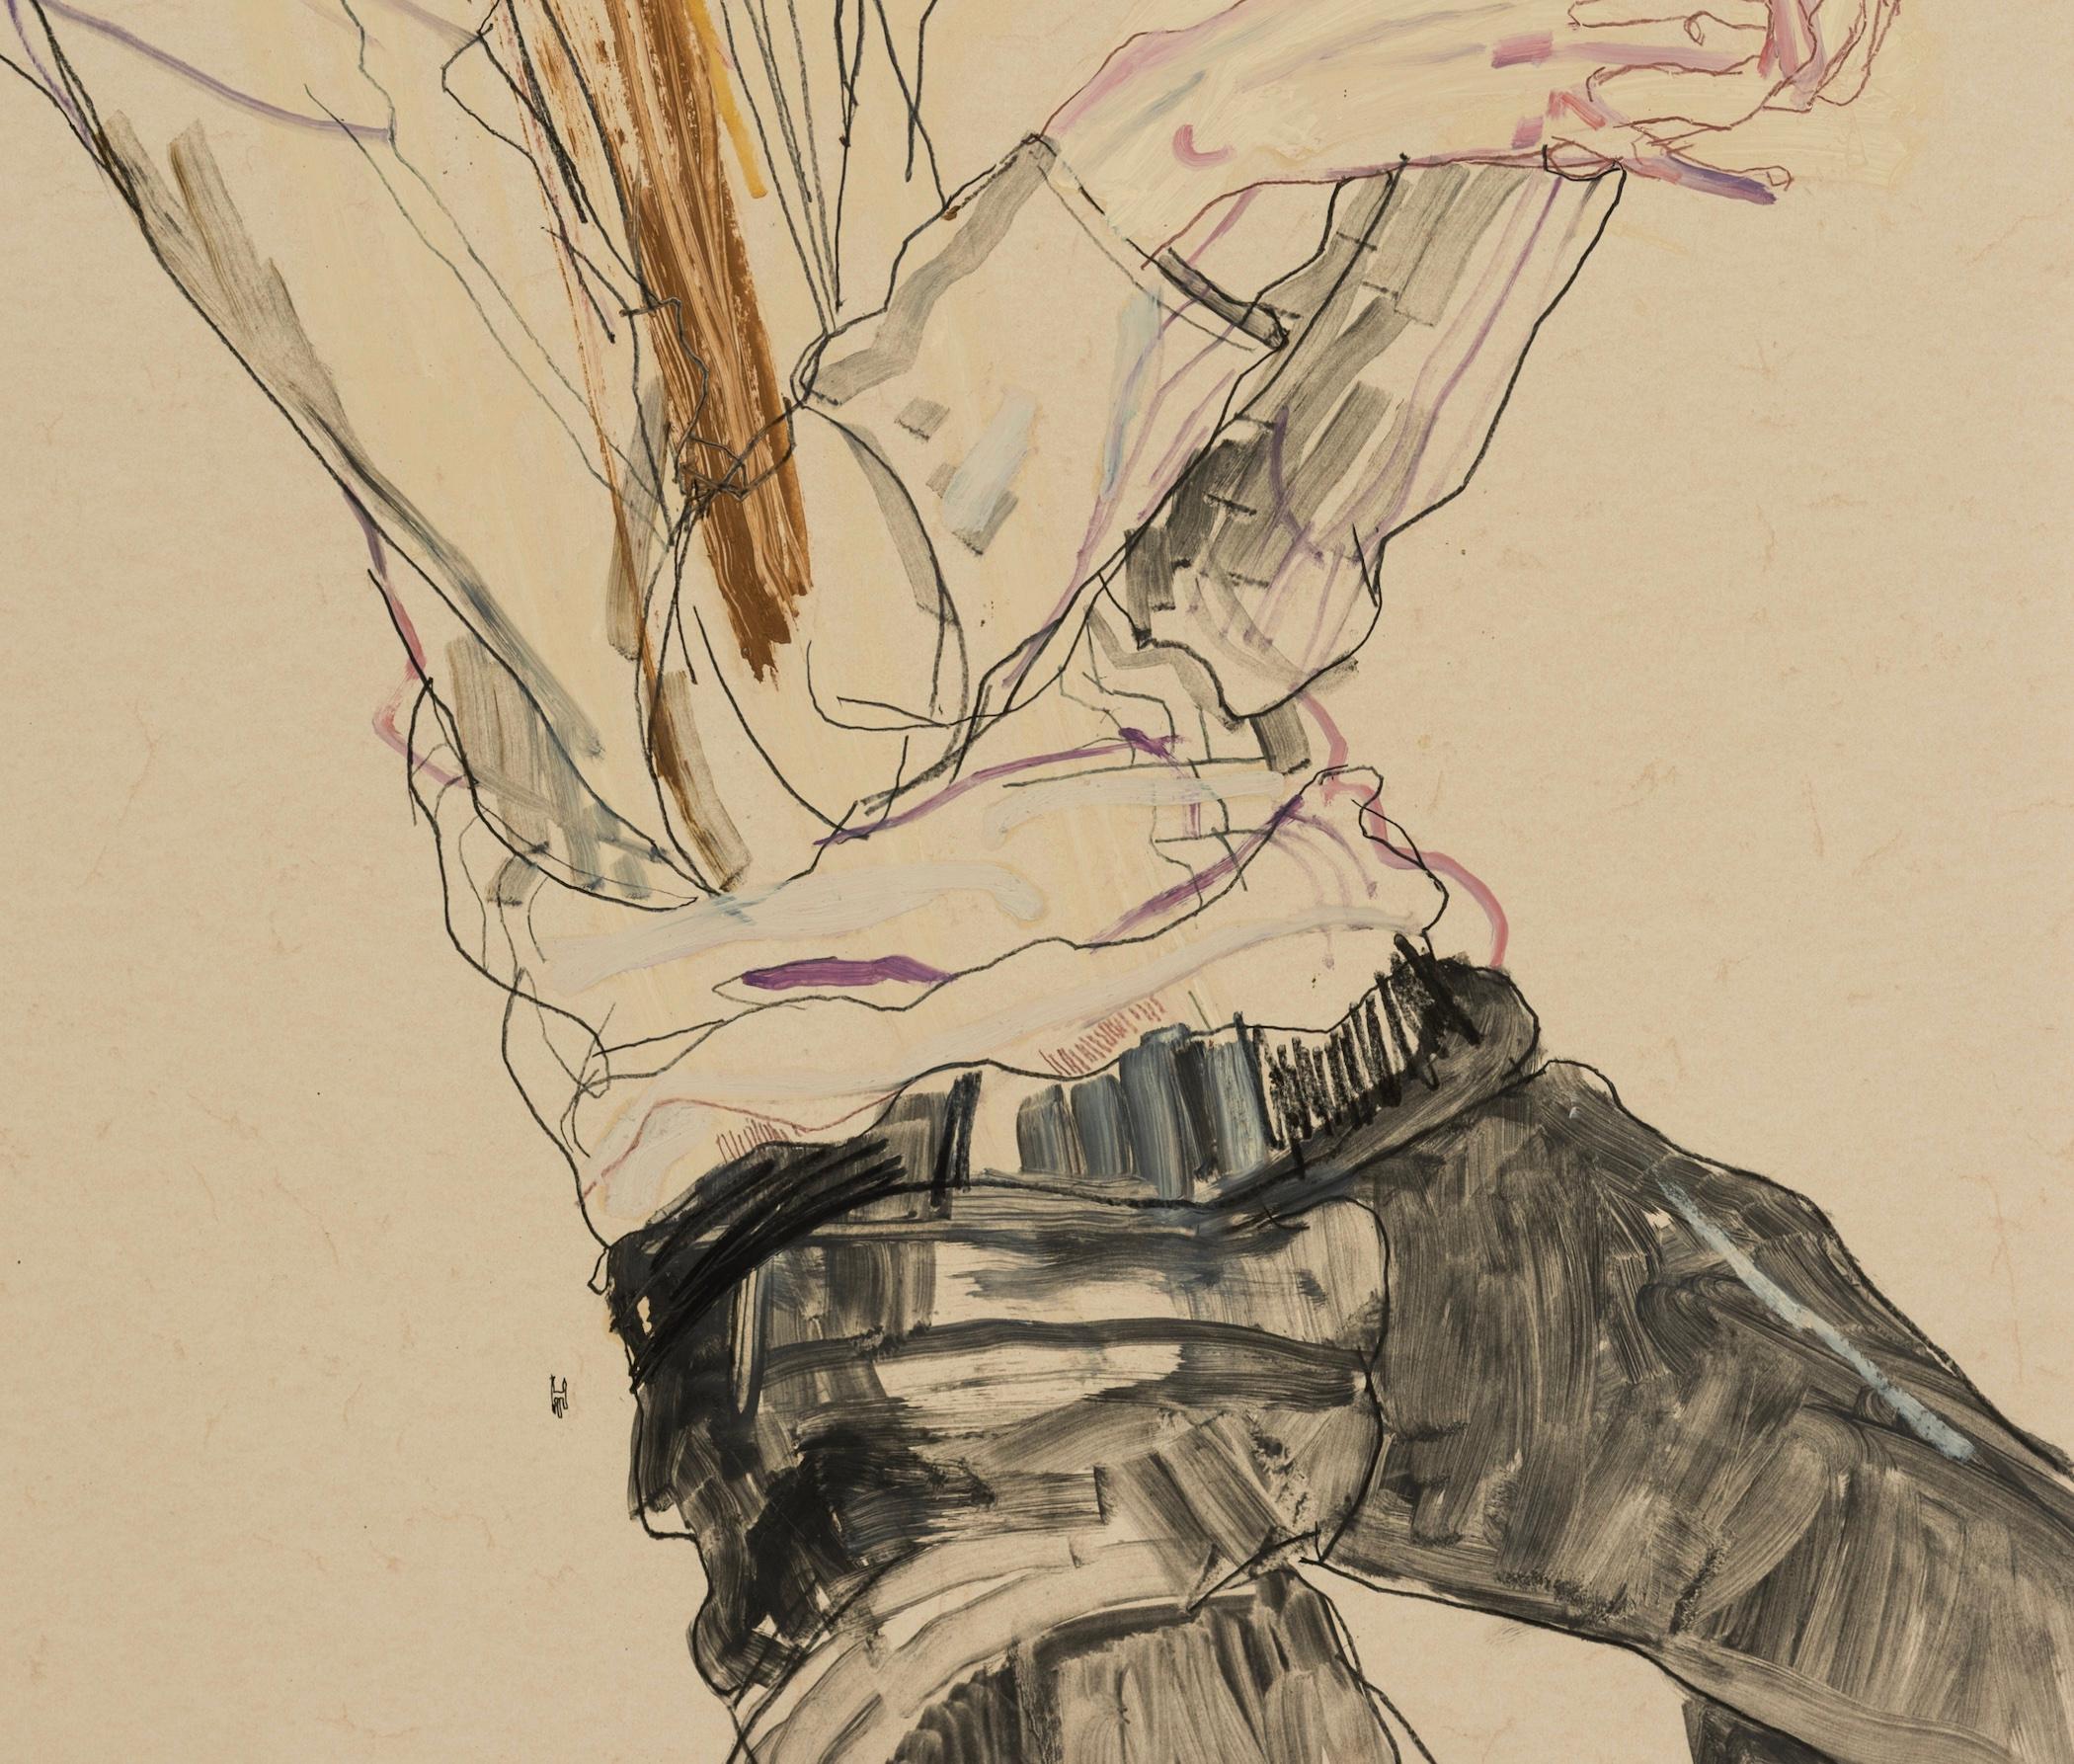 Ben Waters (Seated, Hand Holding), Mixed media on Pergamenata parchment - Contemporary Painting by Howard Tangye